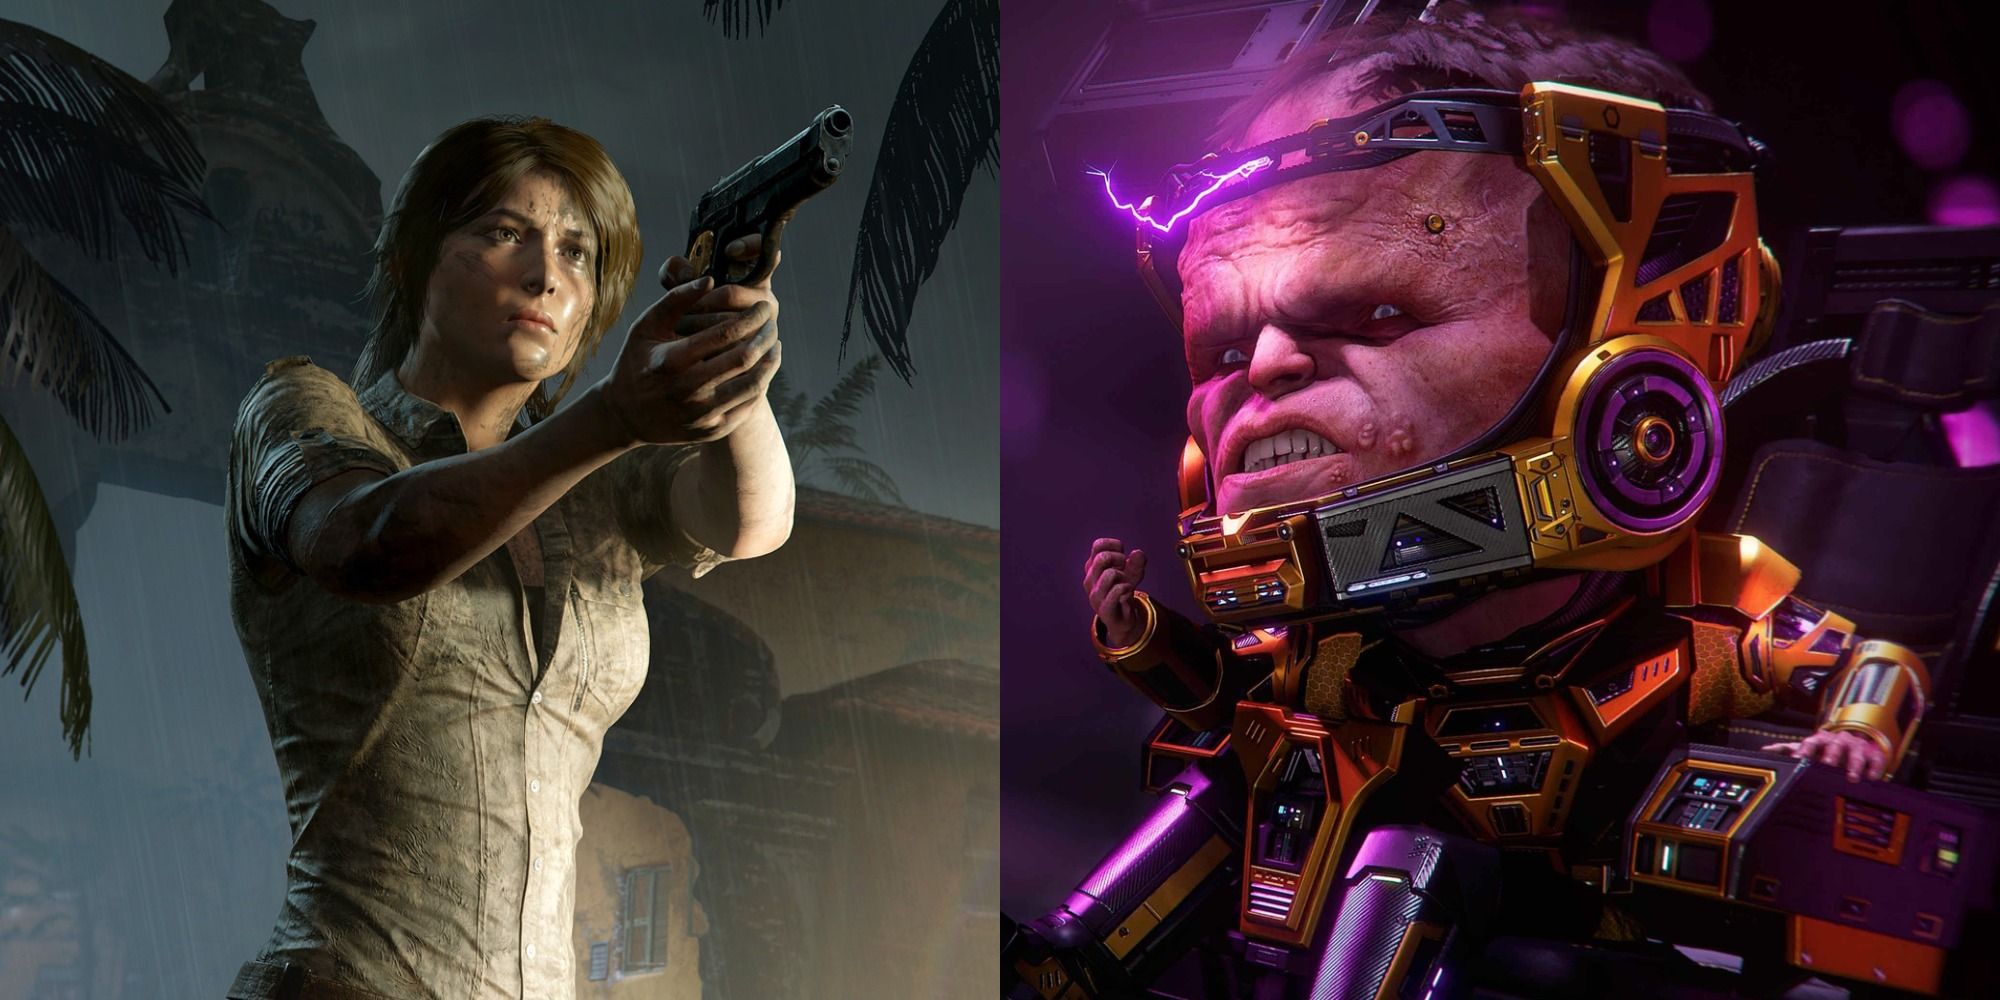 Lara Croft From Shadow Of The Tomb Raider Aiming Her Pistol At Marvel's Avegners' MODOK Mash-Up